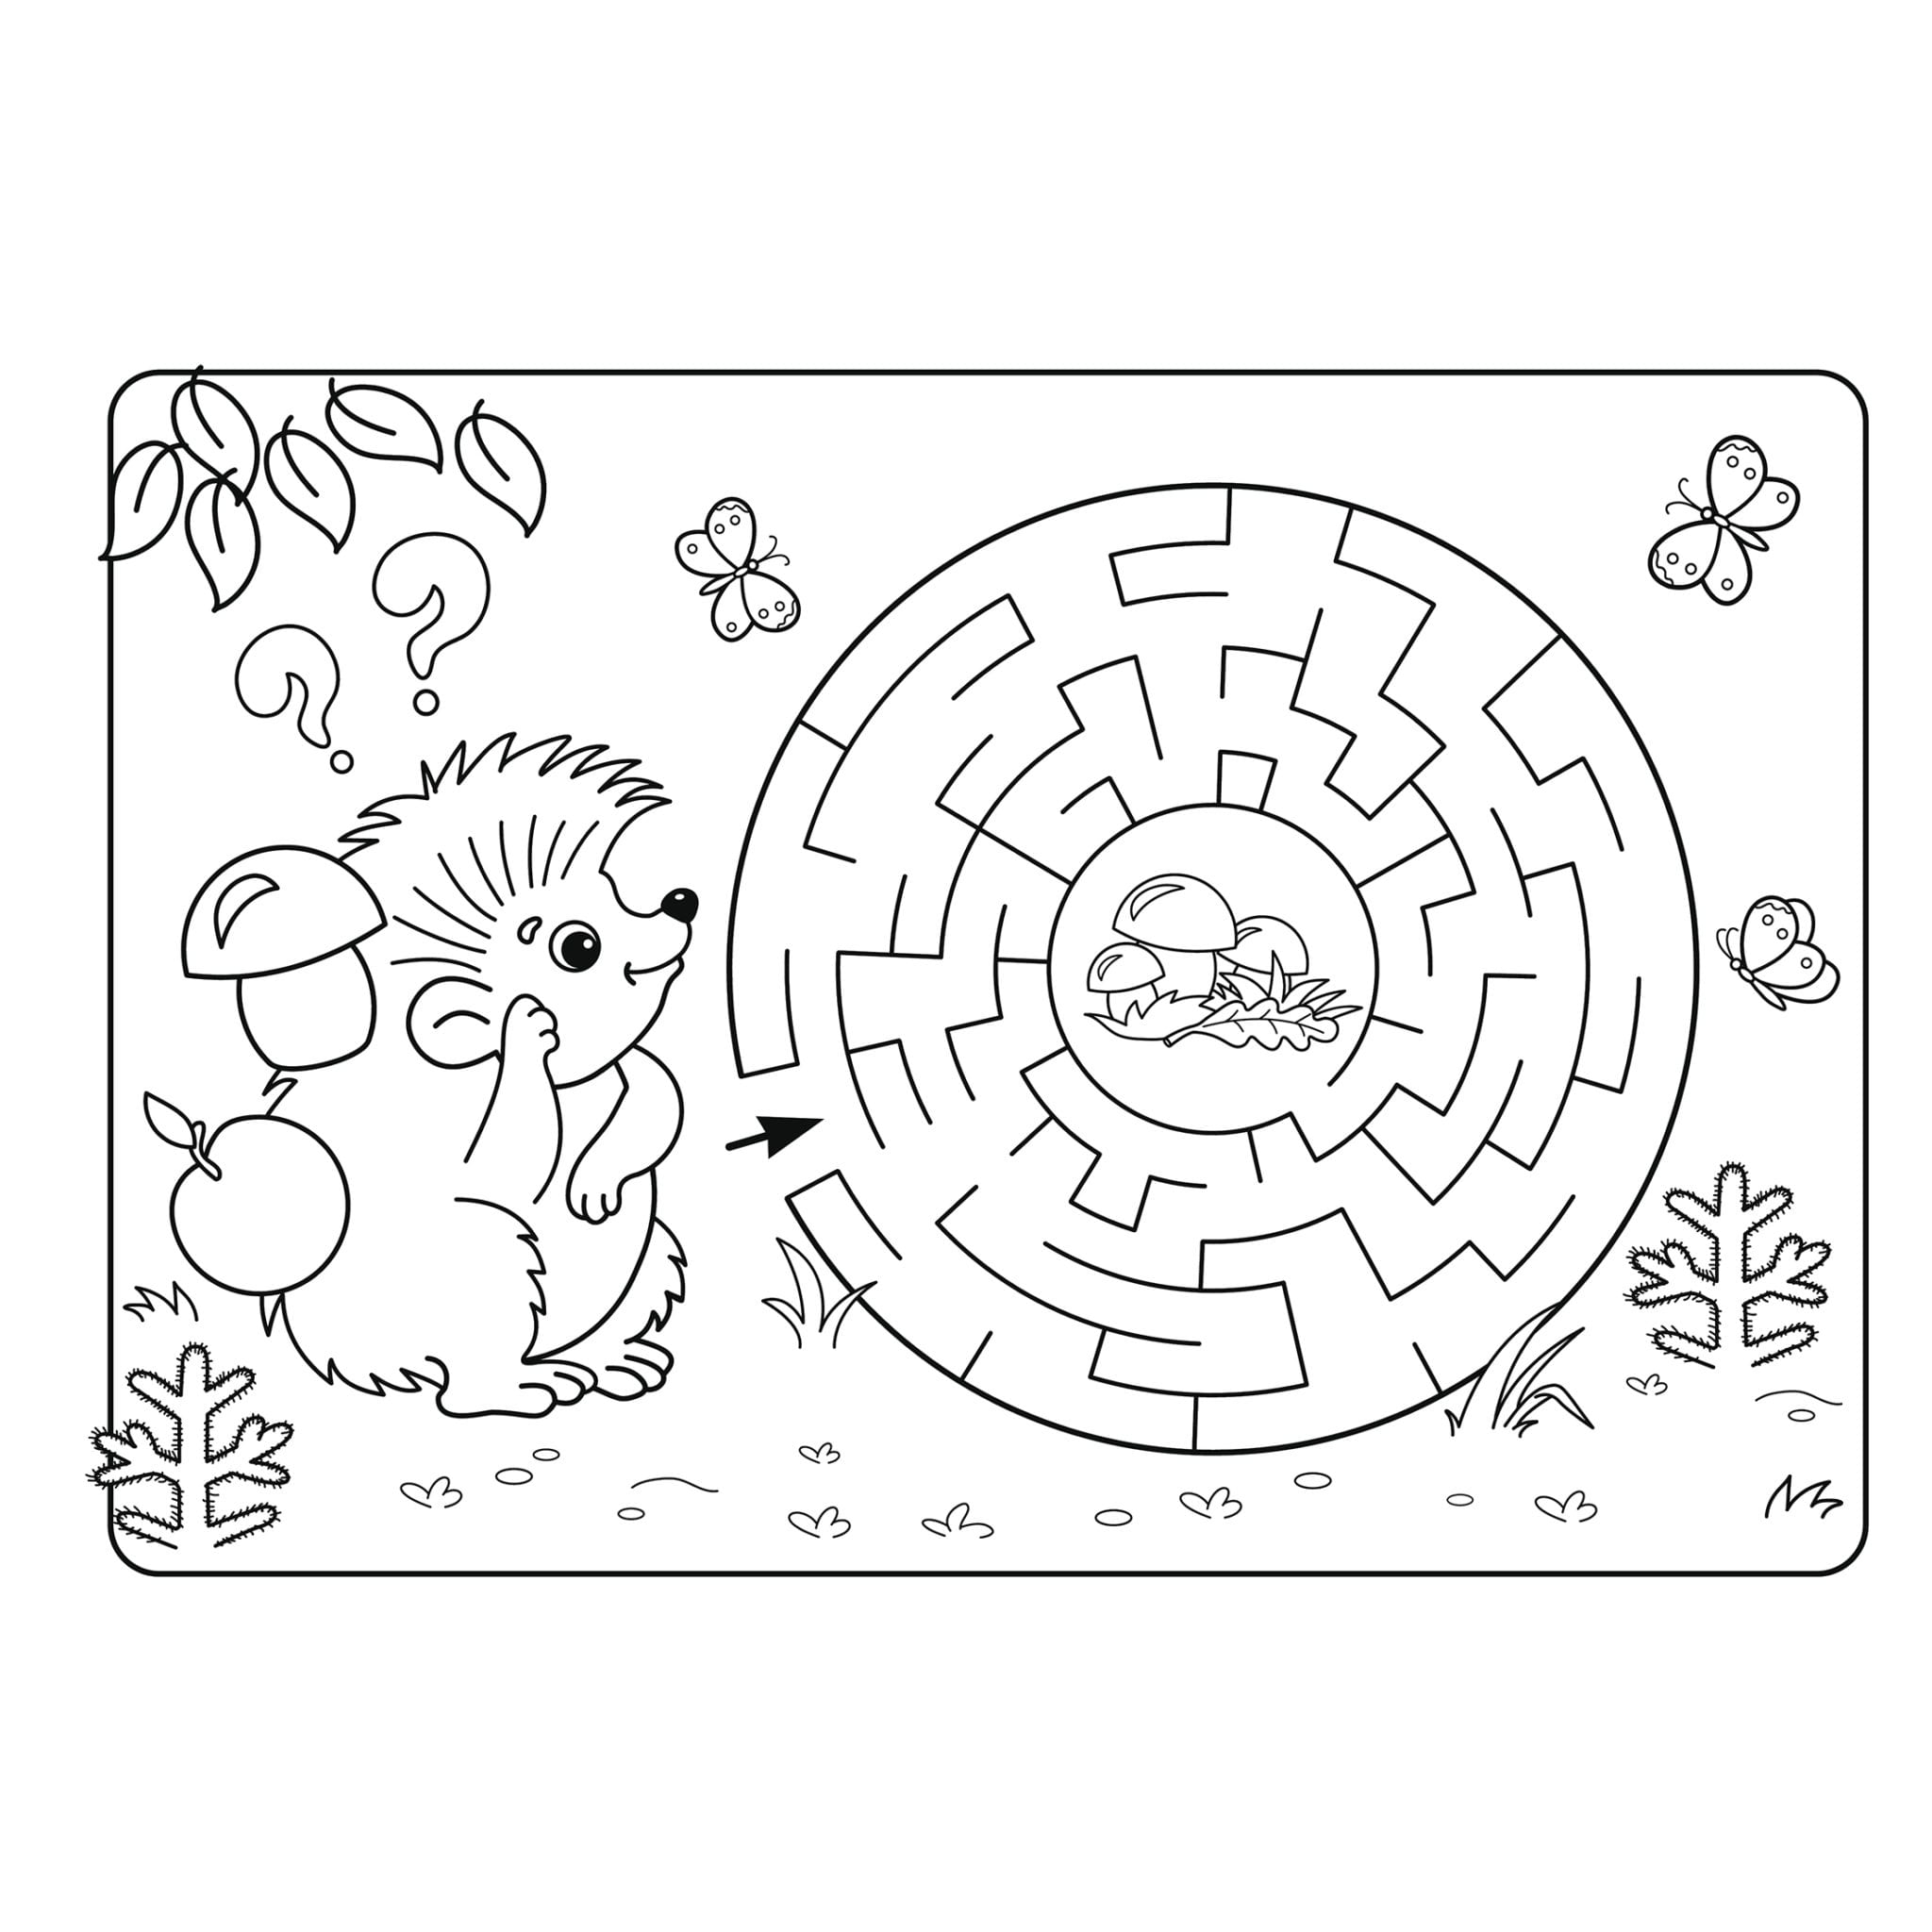 printable coloring page that  has a maze game and a pictures of a hedge hog